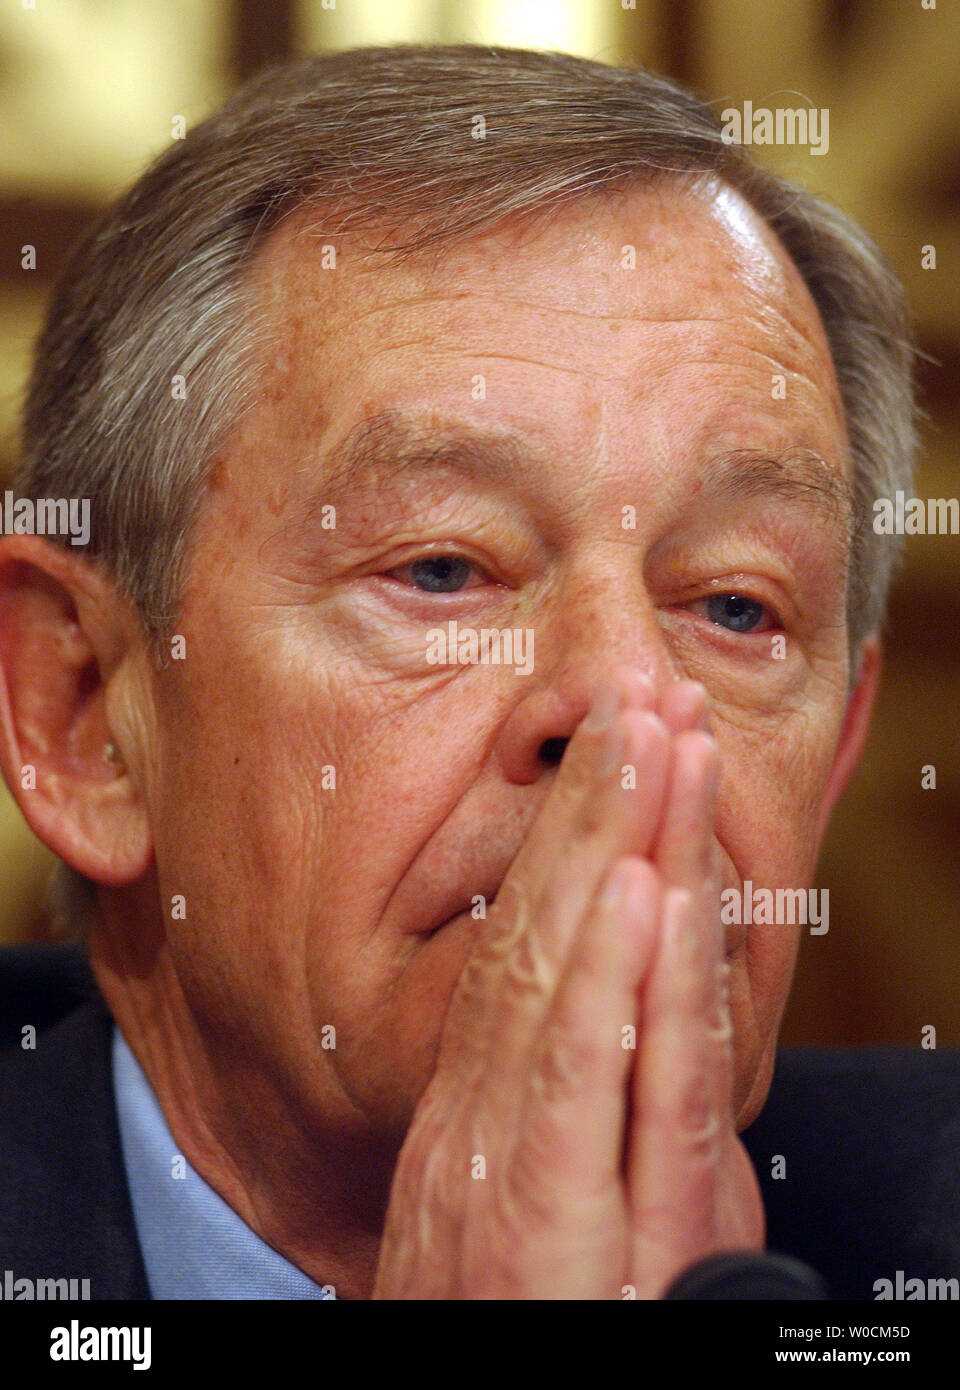 Sen. George Voinovich, R-OH, composes himself just before voting to send John Bolton to the Senate floor for a final vote on May 12, 2005, on Capitol Hill in Washington. The Senate Foreign Relations Committee held a five hour meeting to discuss and vote on Bolton, President Bush's nominee to be the U.S. ambassador to the UN.    (UPI Photo/Roger L. Wollenberg) Stock Photo